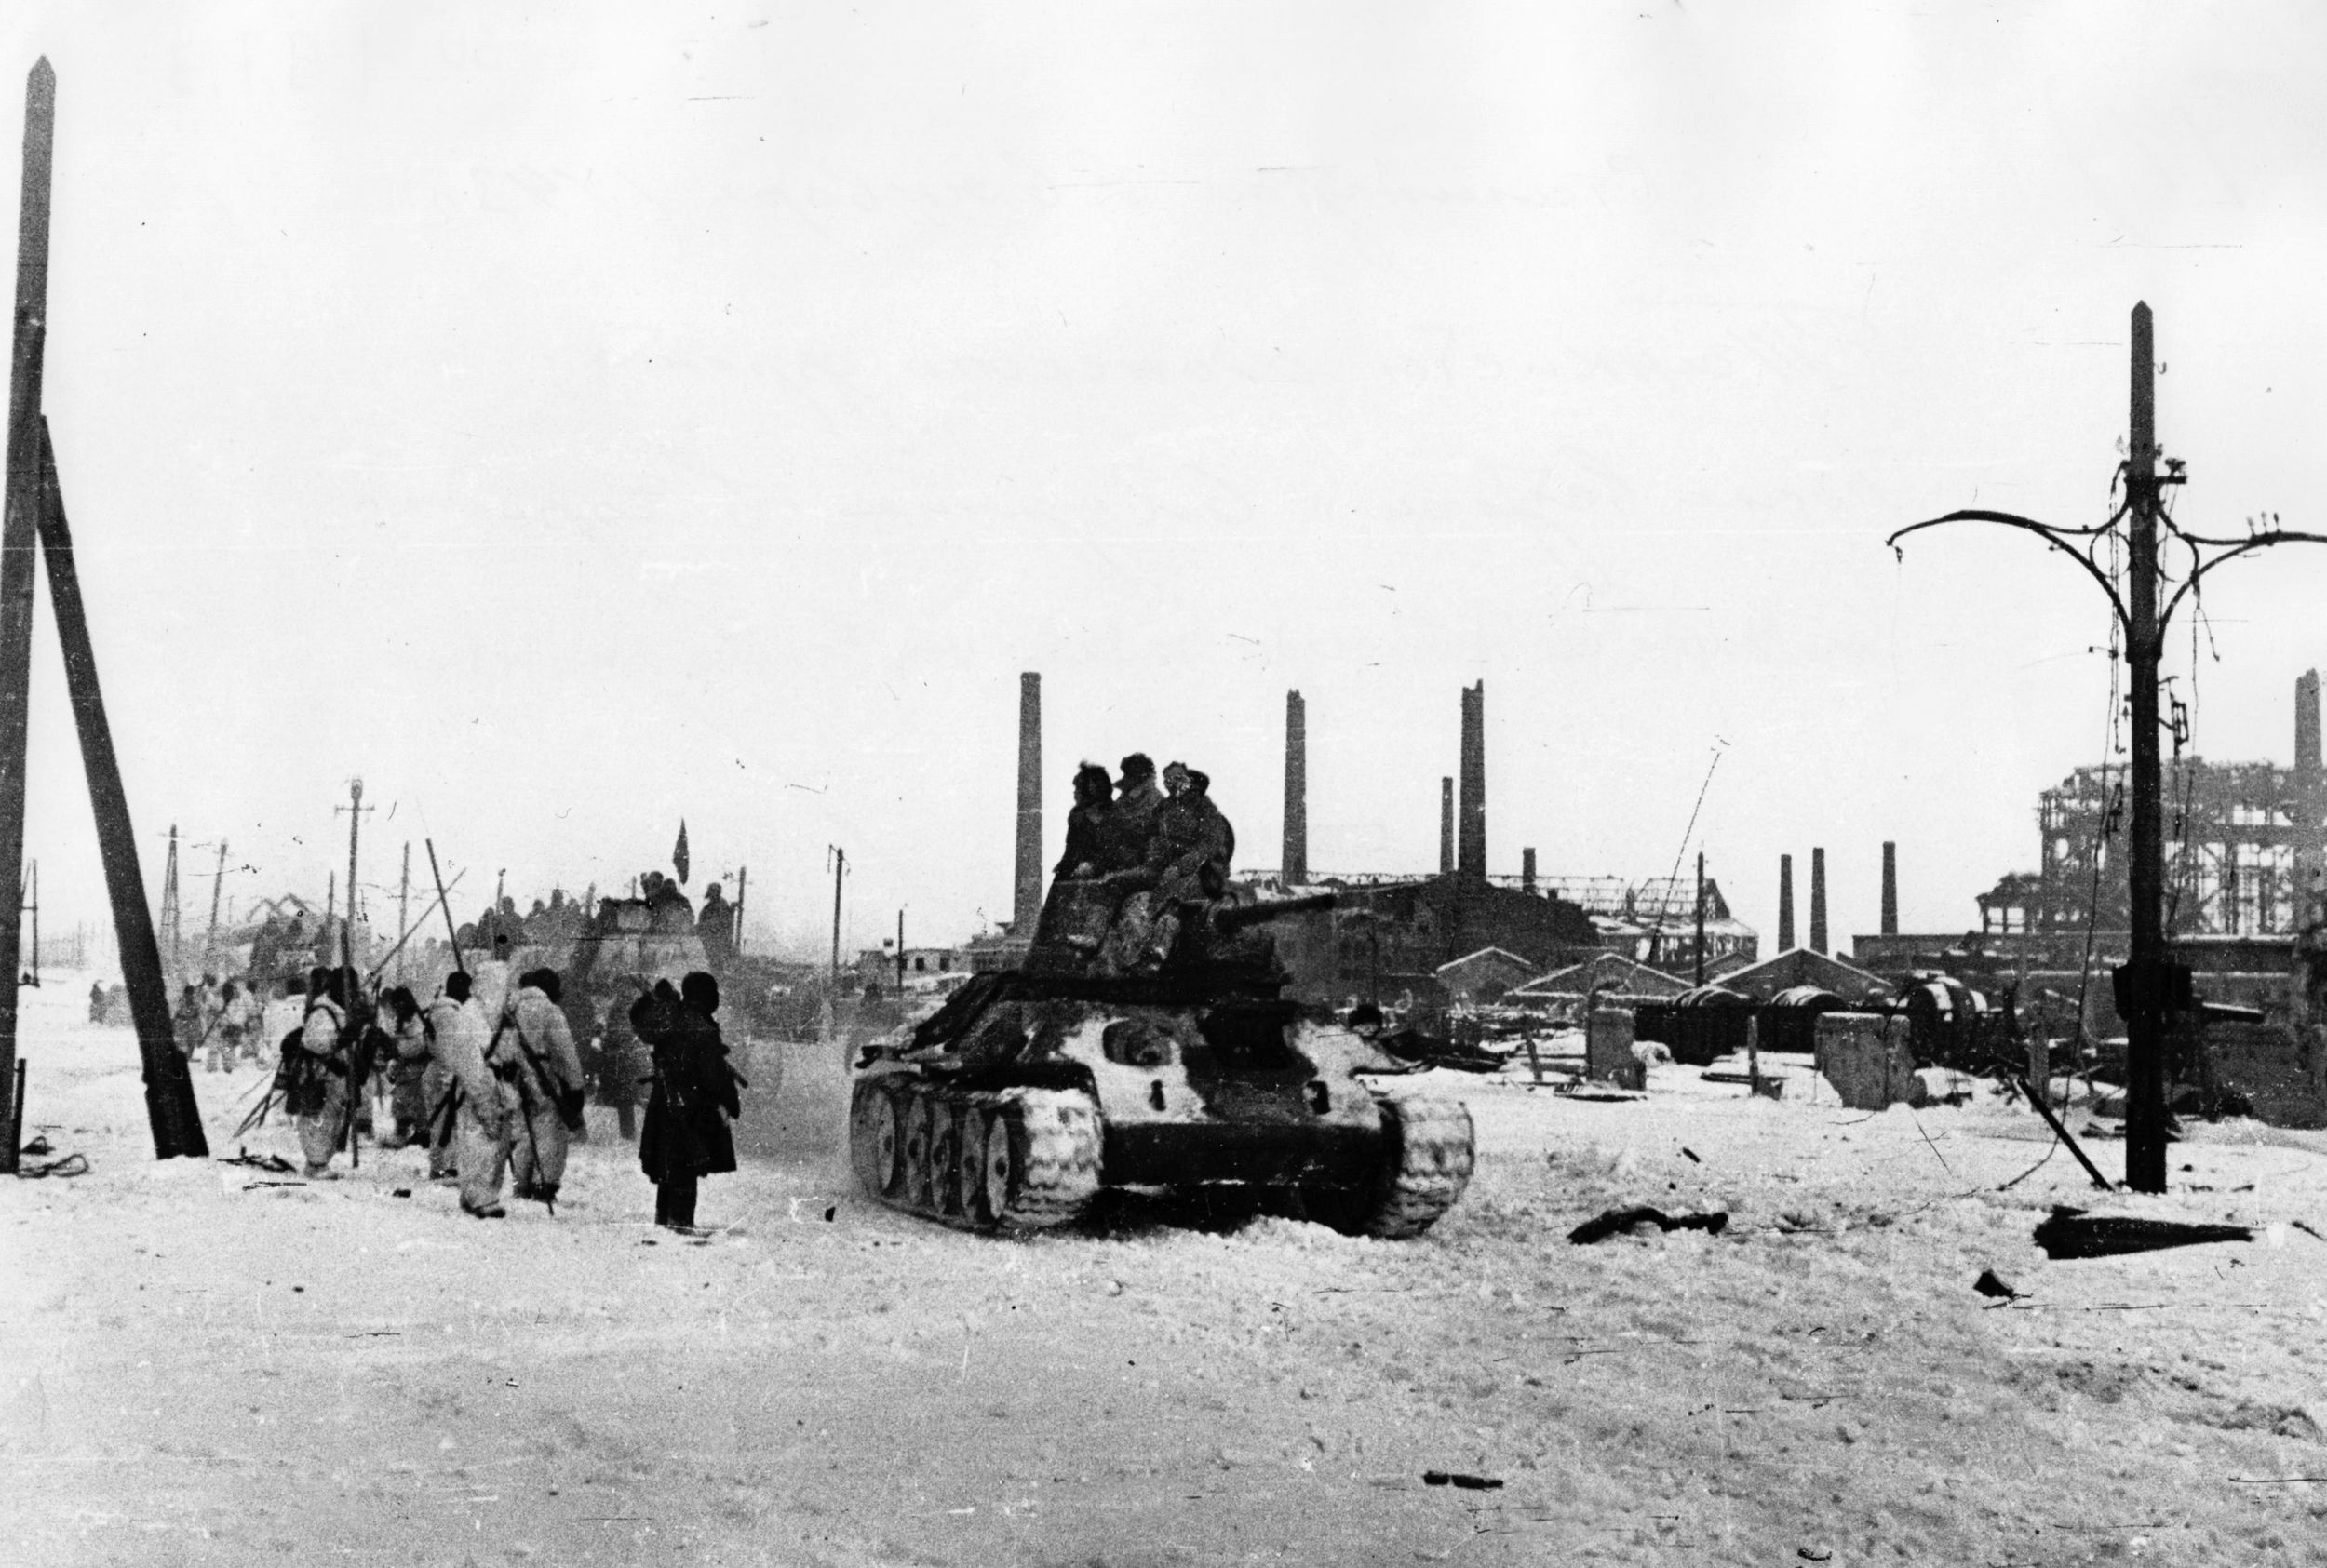 On January 26, 1943, Soviet soldiers of the 62nd Army and the Don Front meet in Stalingrad, having split the German defenders of the city into two pockets. Within days, Field Marshal Friedrich von Paulus, promoted by Hitler, surrendered the remaining German troops of Sixth Army.